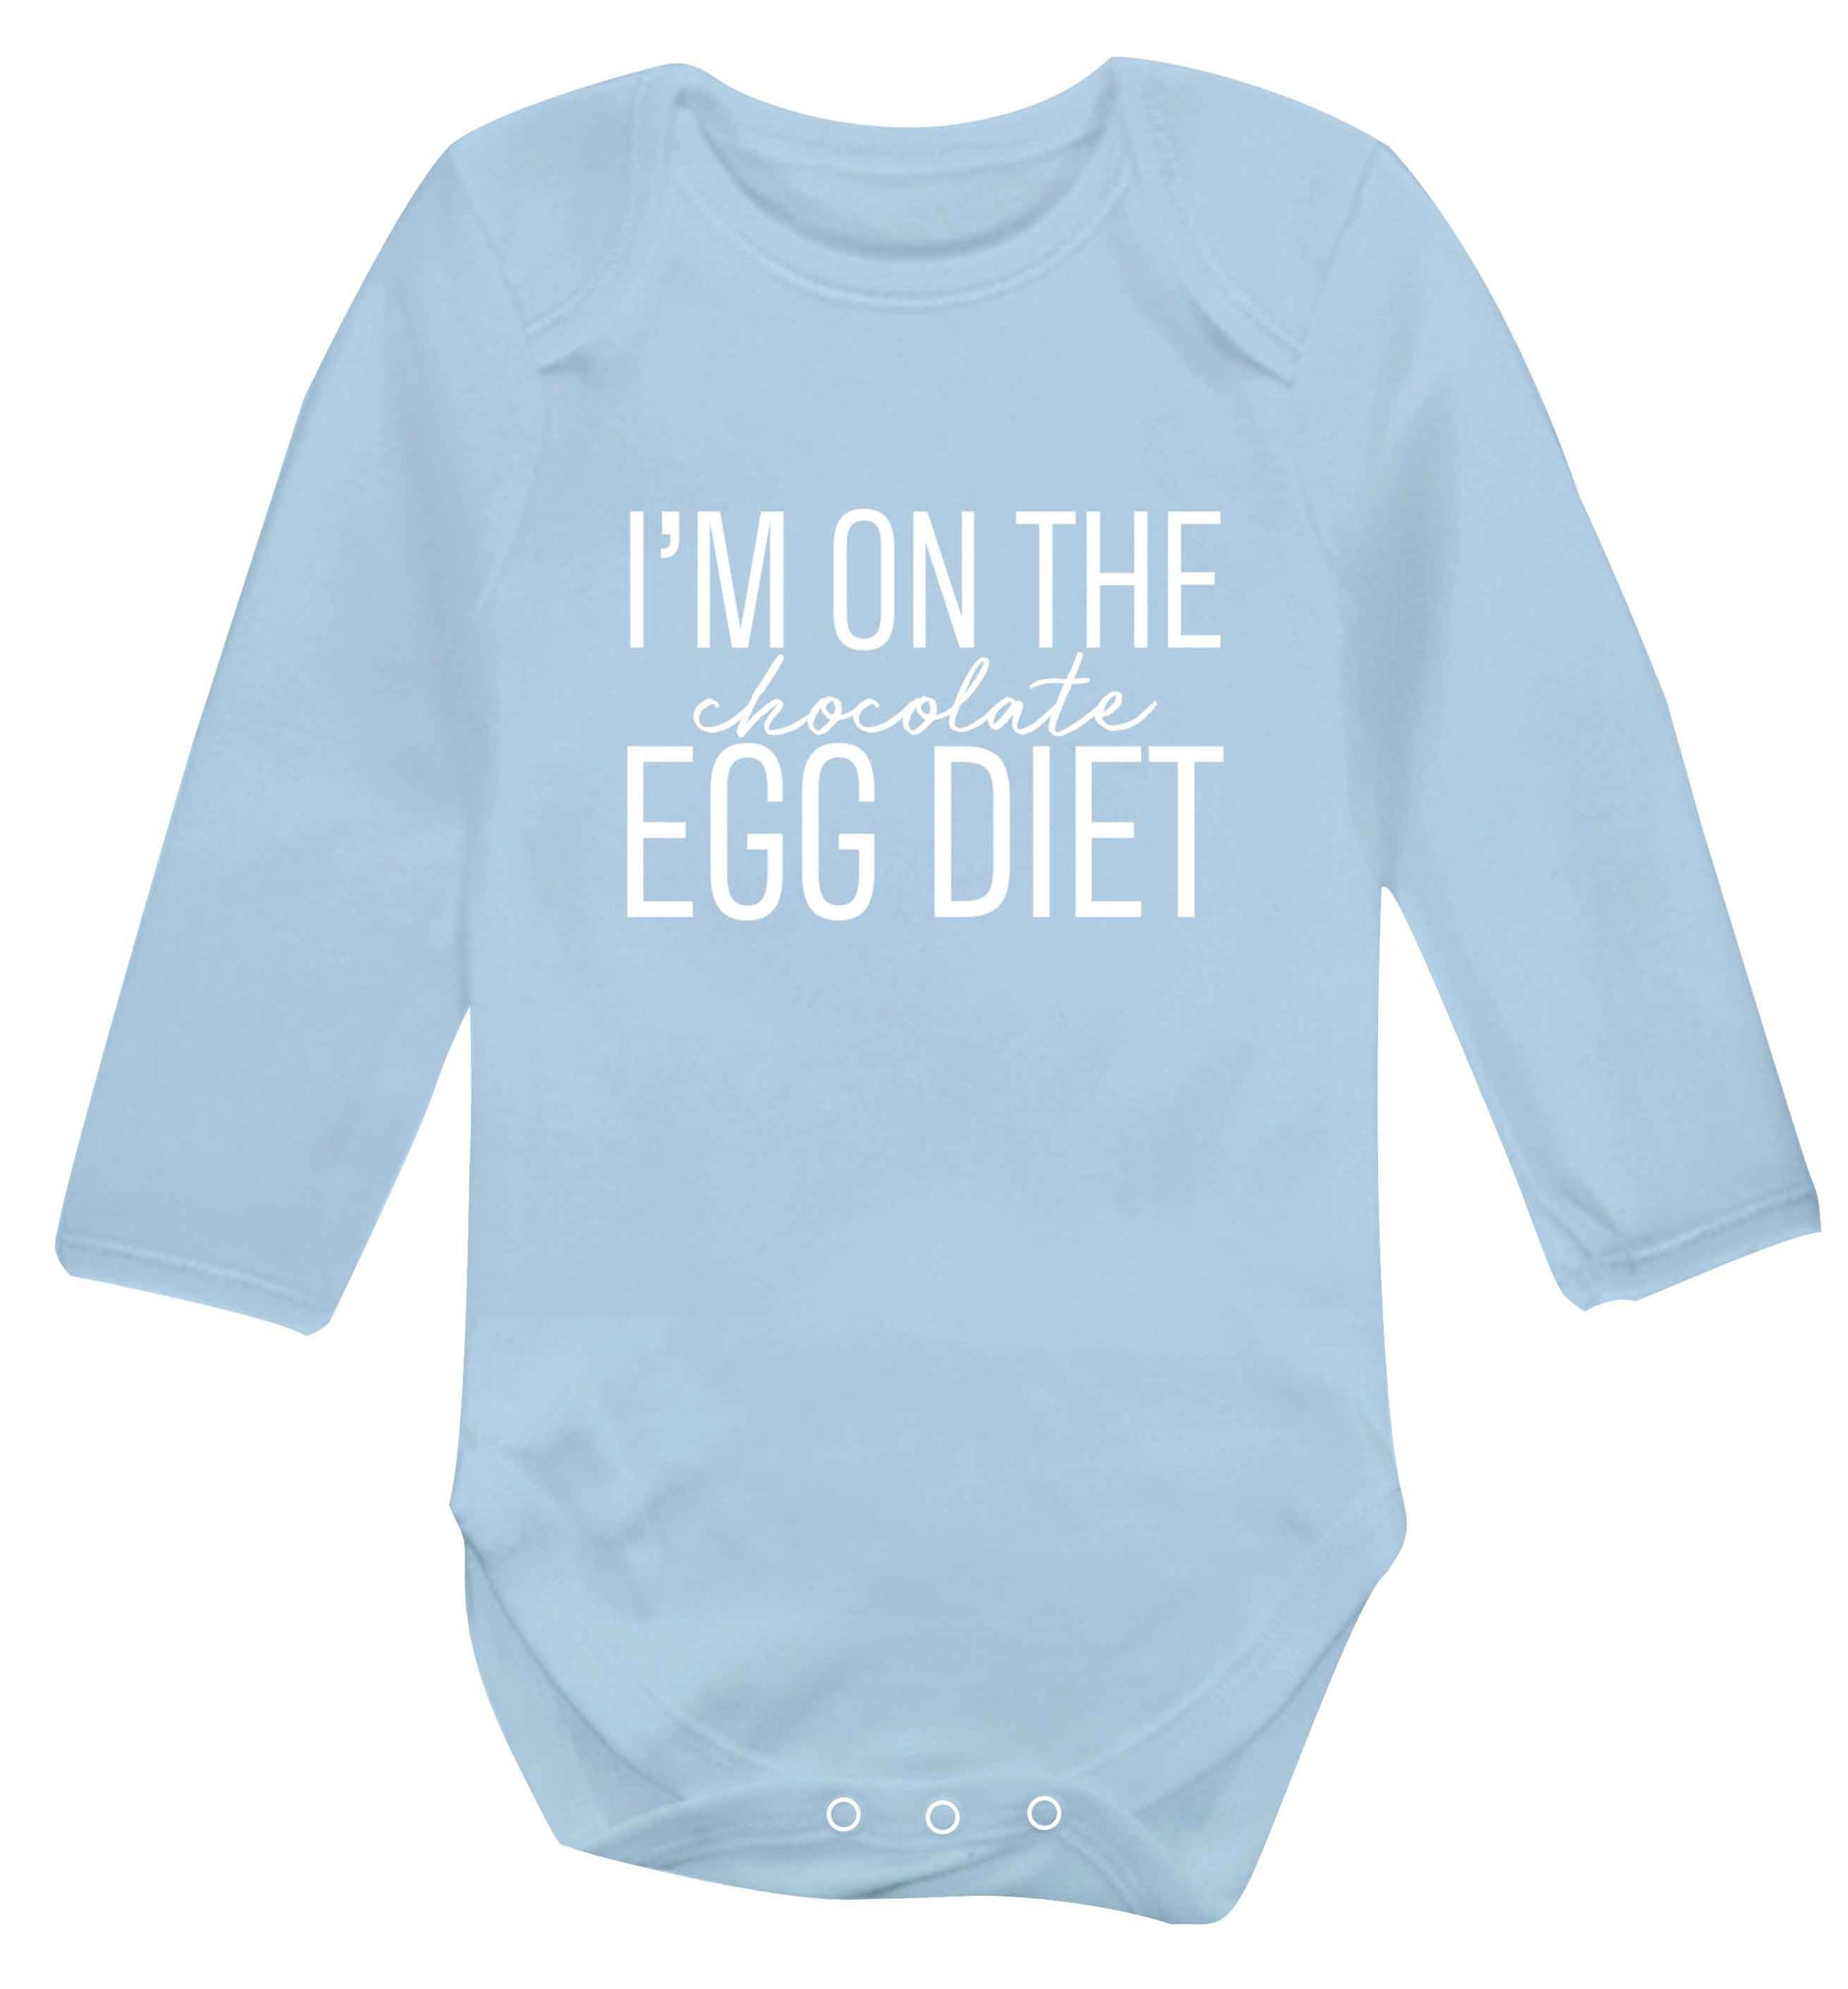 I'm on the chocolate egg diet baby vest long sleeved pale blue 6-12 months